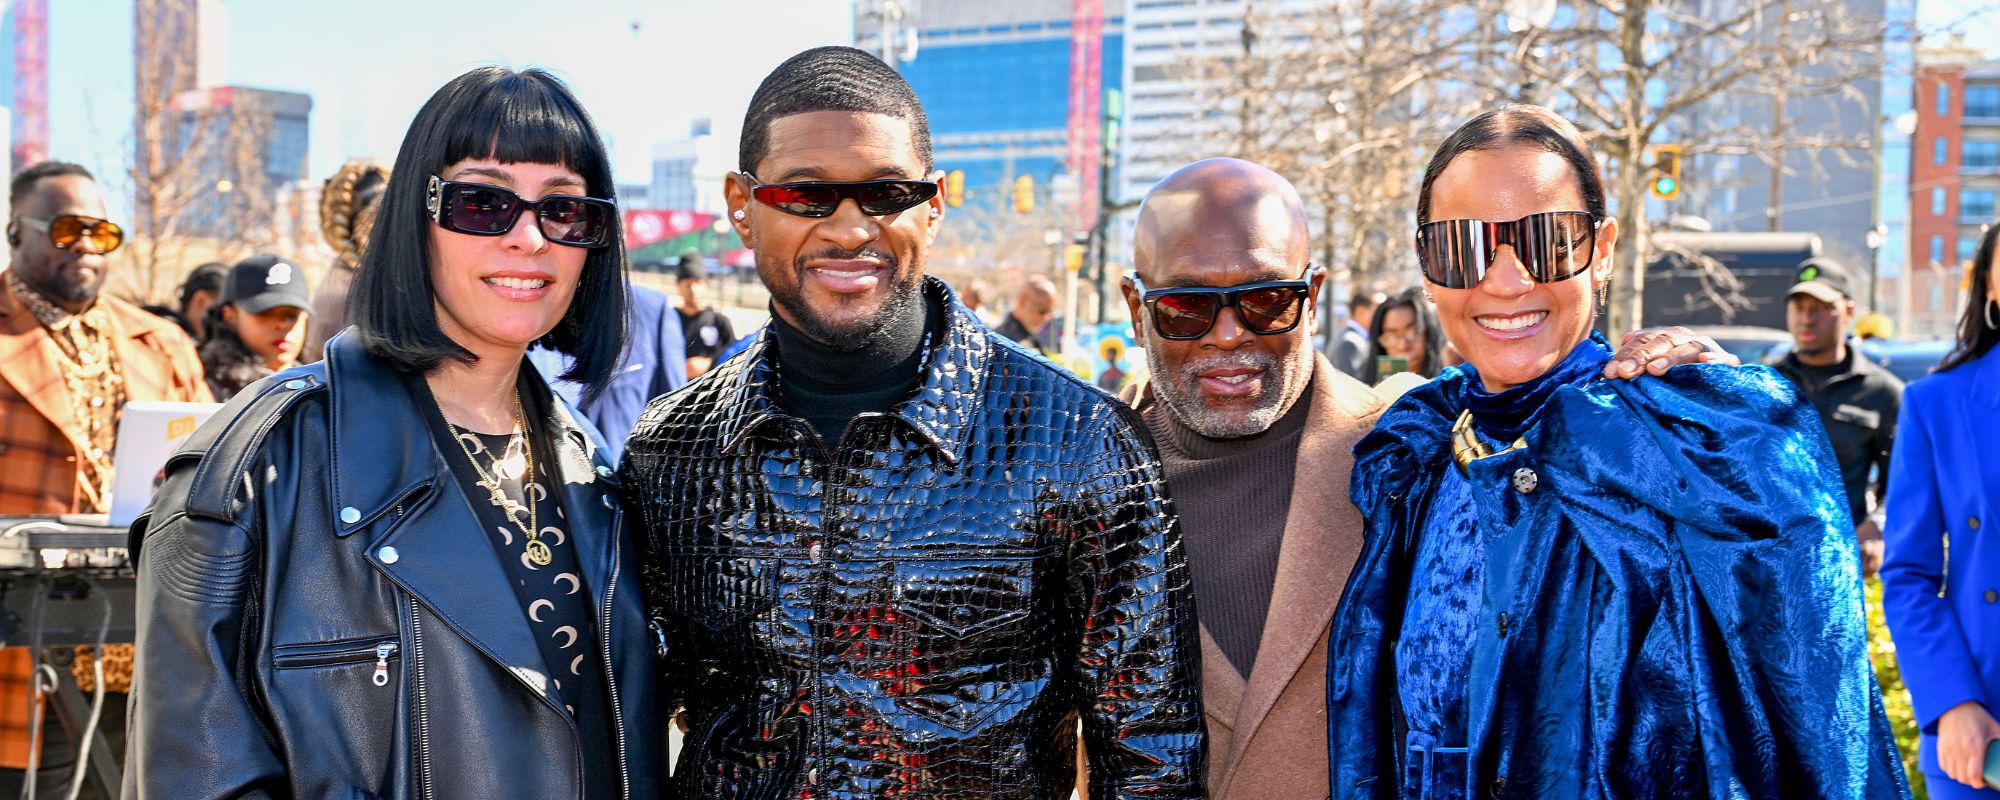 LOOK: Usher Ties The Knot in Vegas Hours After Super Bowl Performance